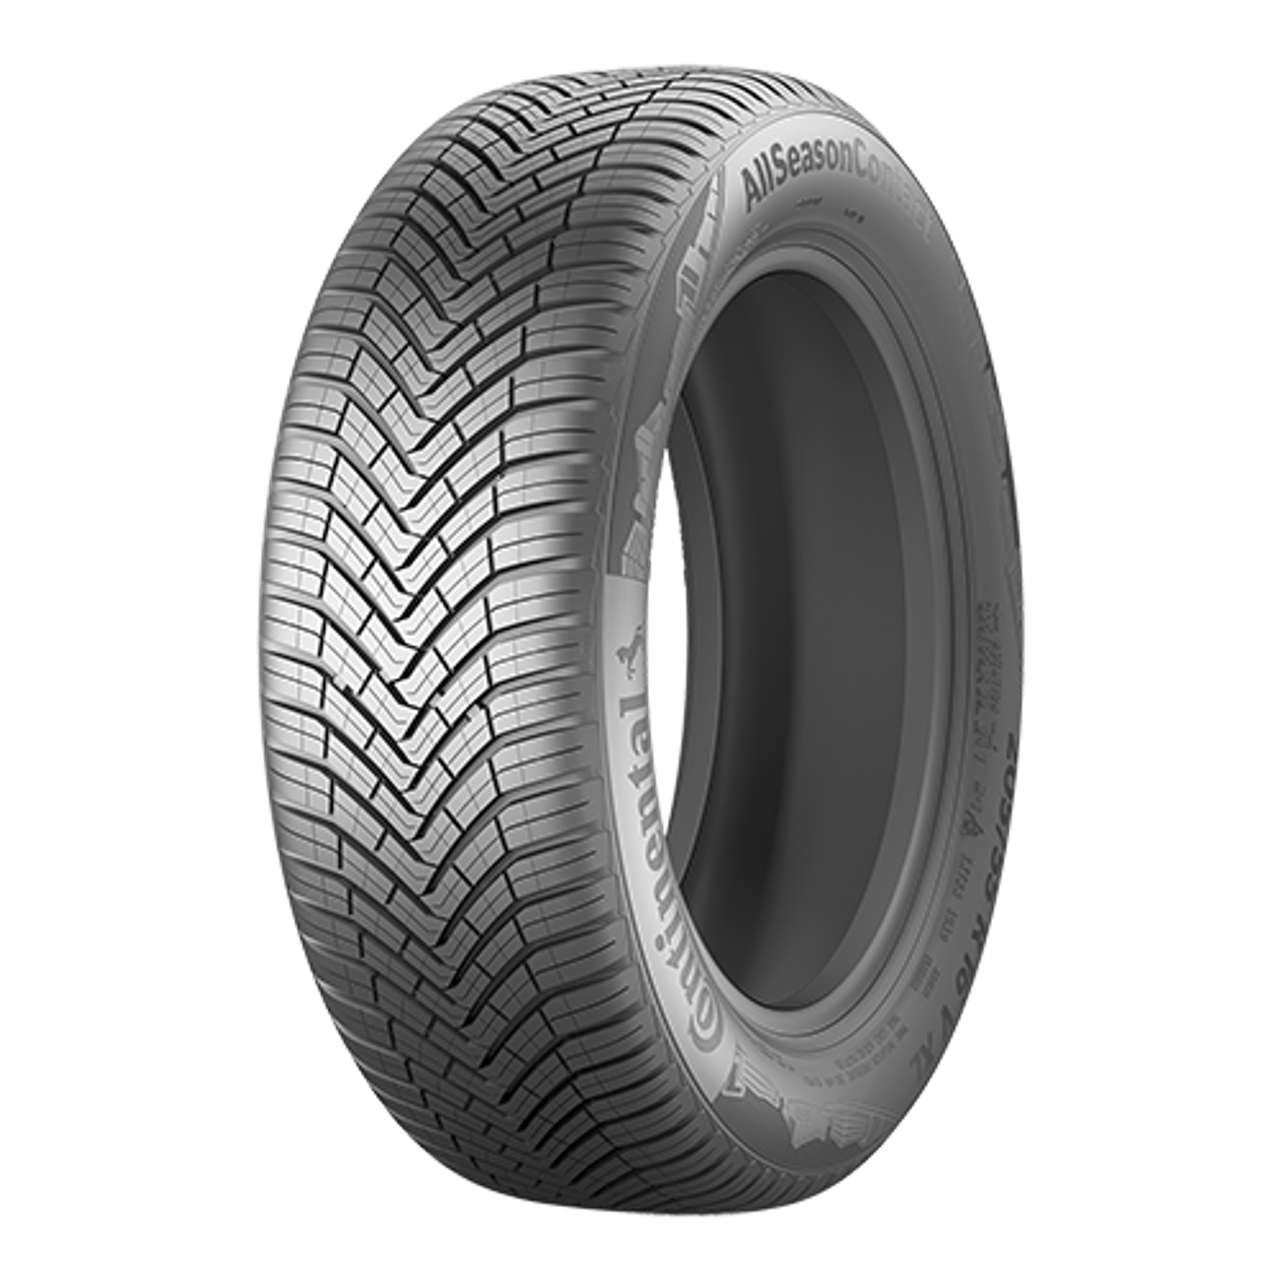 CONTINENTAL ALLSEASONCONTACT (EVc) 195/55R16 87H BSW